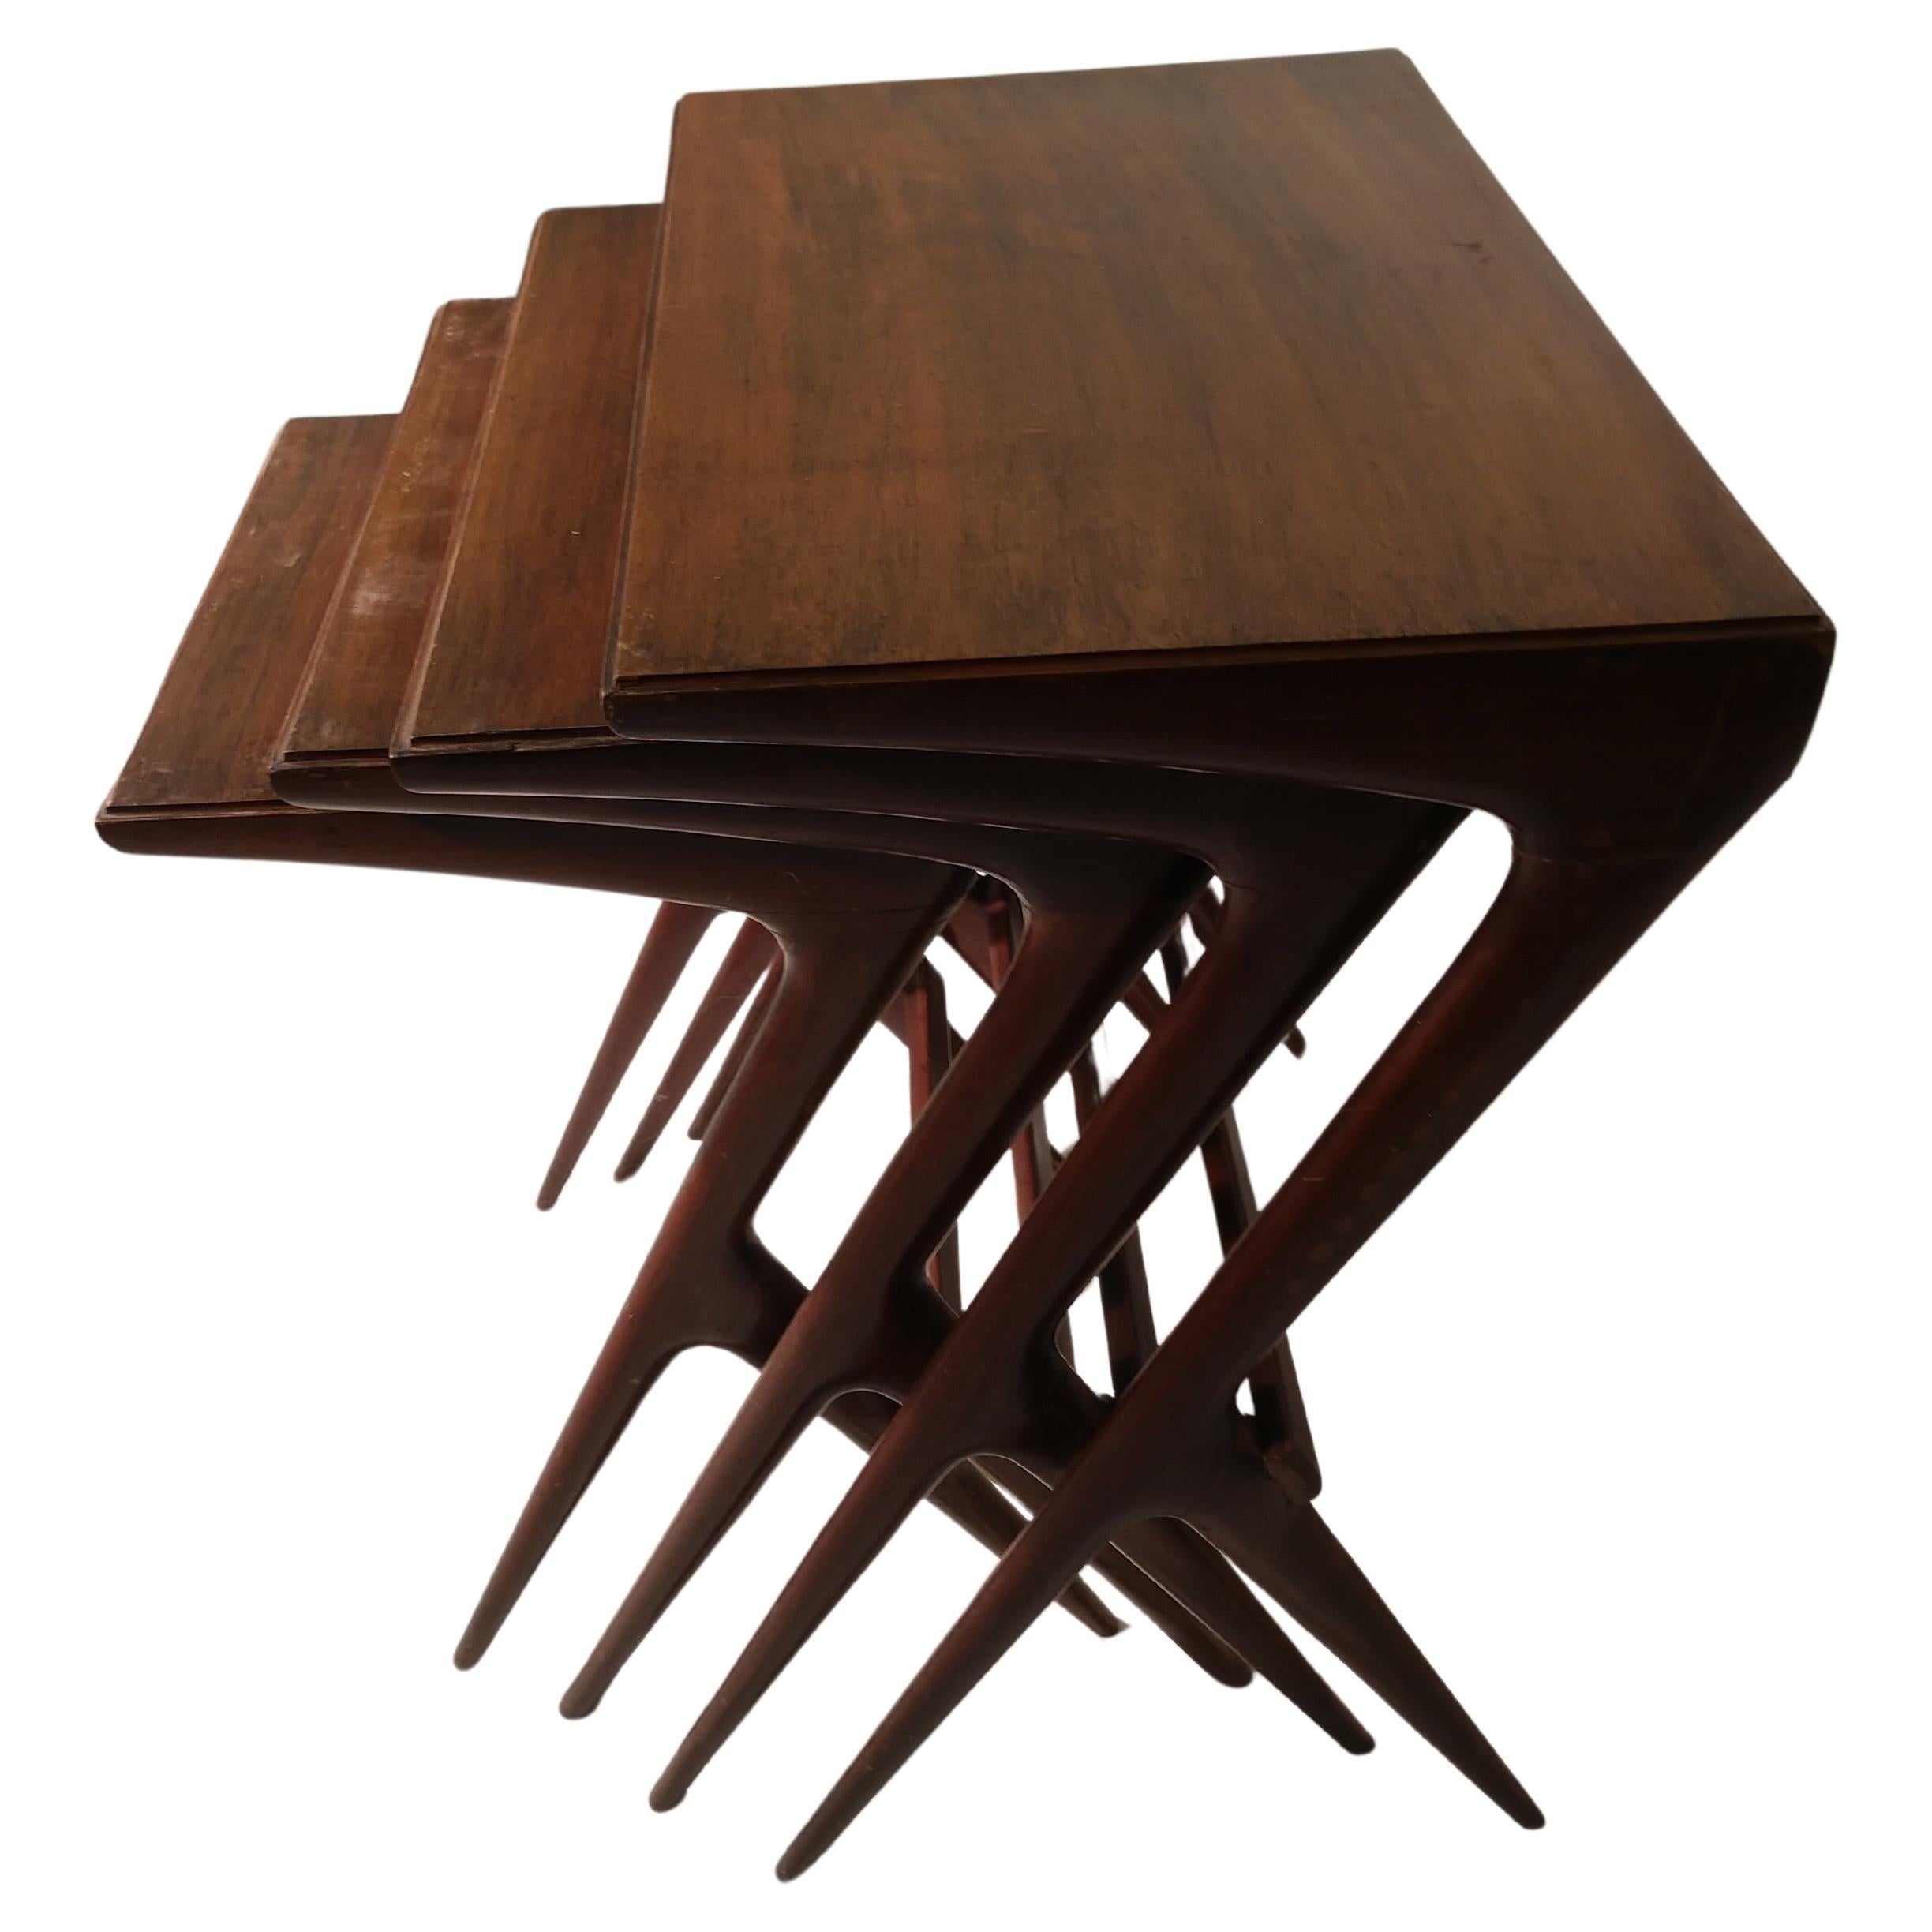 Elegant and sculptural set of 4 walnut nesting tables from the 1950s by Ico Parisi. Tables are very tight and stable. Original finish. Price is for the set which consists of:
Measures: #1. 23.5 x 15.75 x 25.75 H
#2 20.75 x 14.25 x 24.25 H
#3 17 x